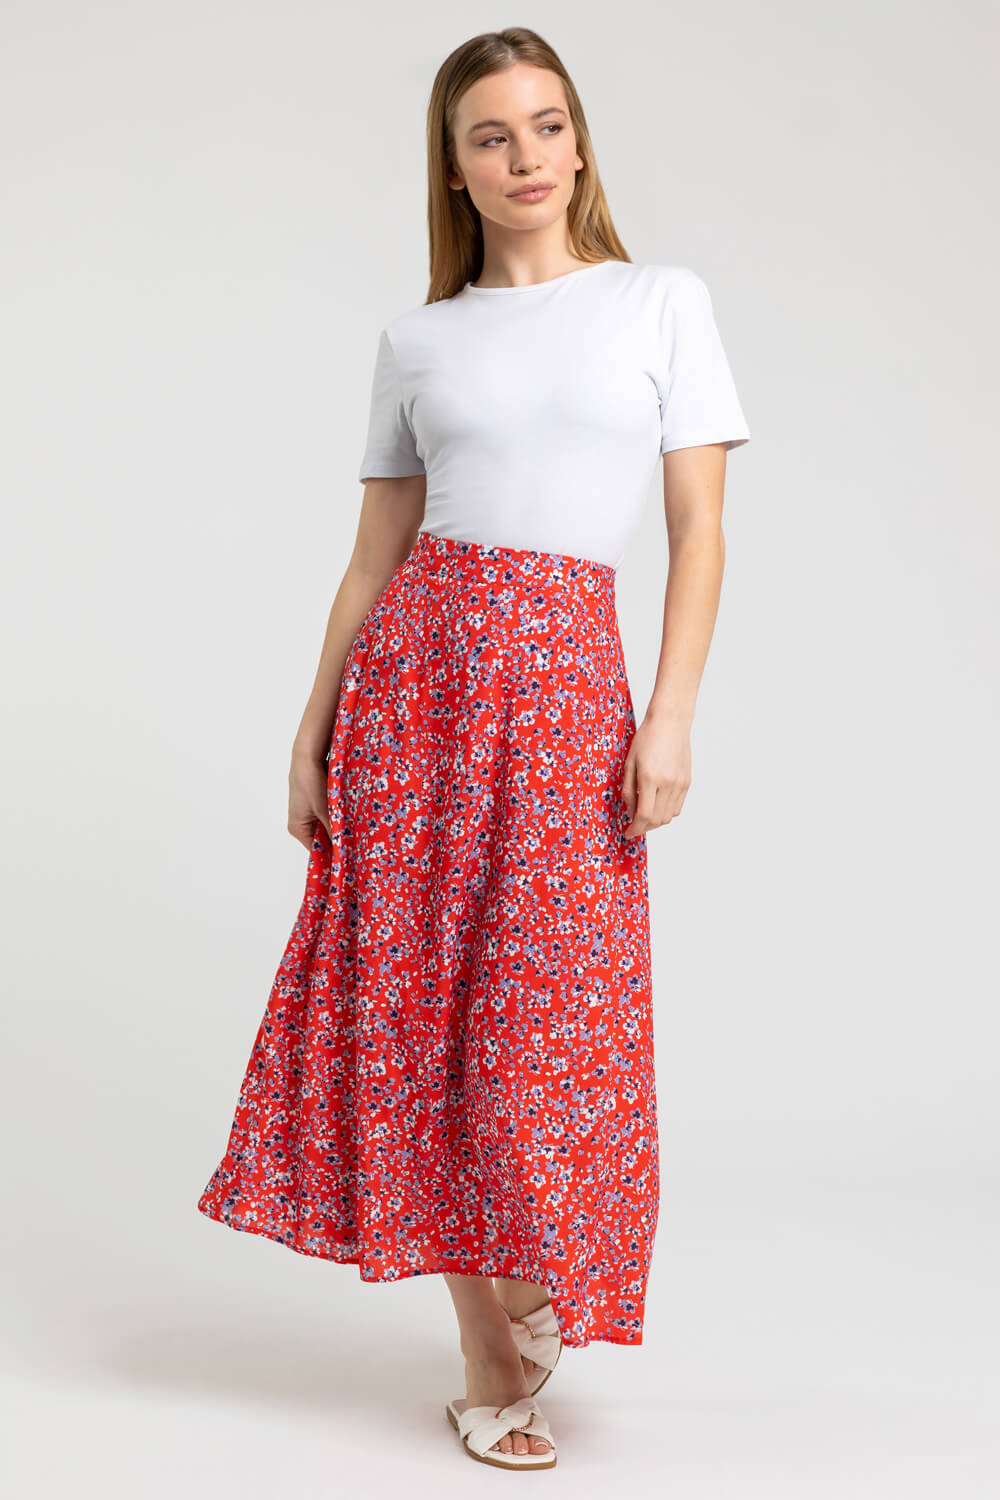 Red Petite Ditsy Floral A-Line Skirt, Image 4 of 4